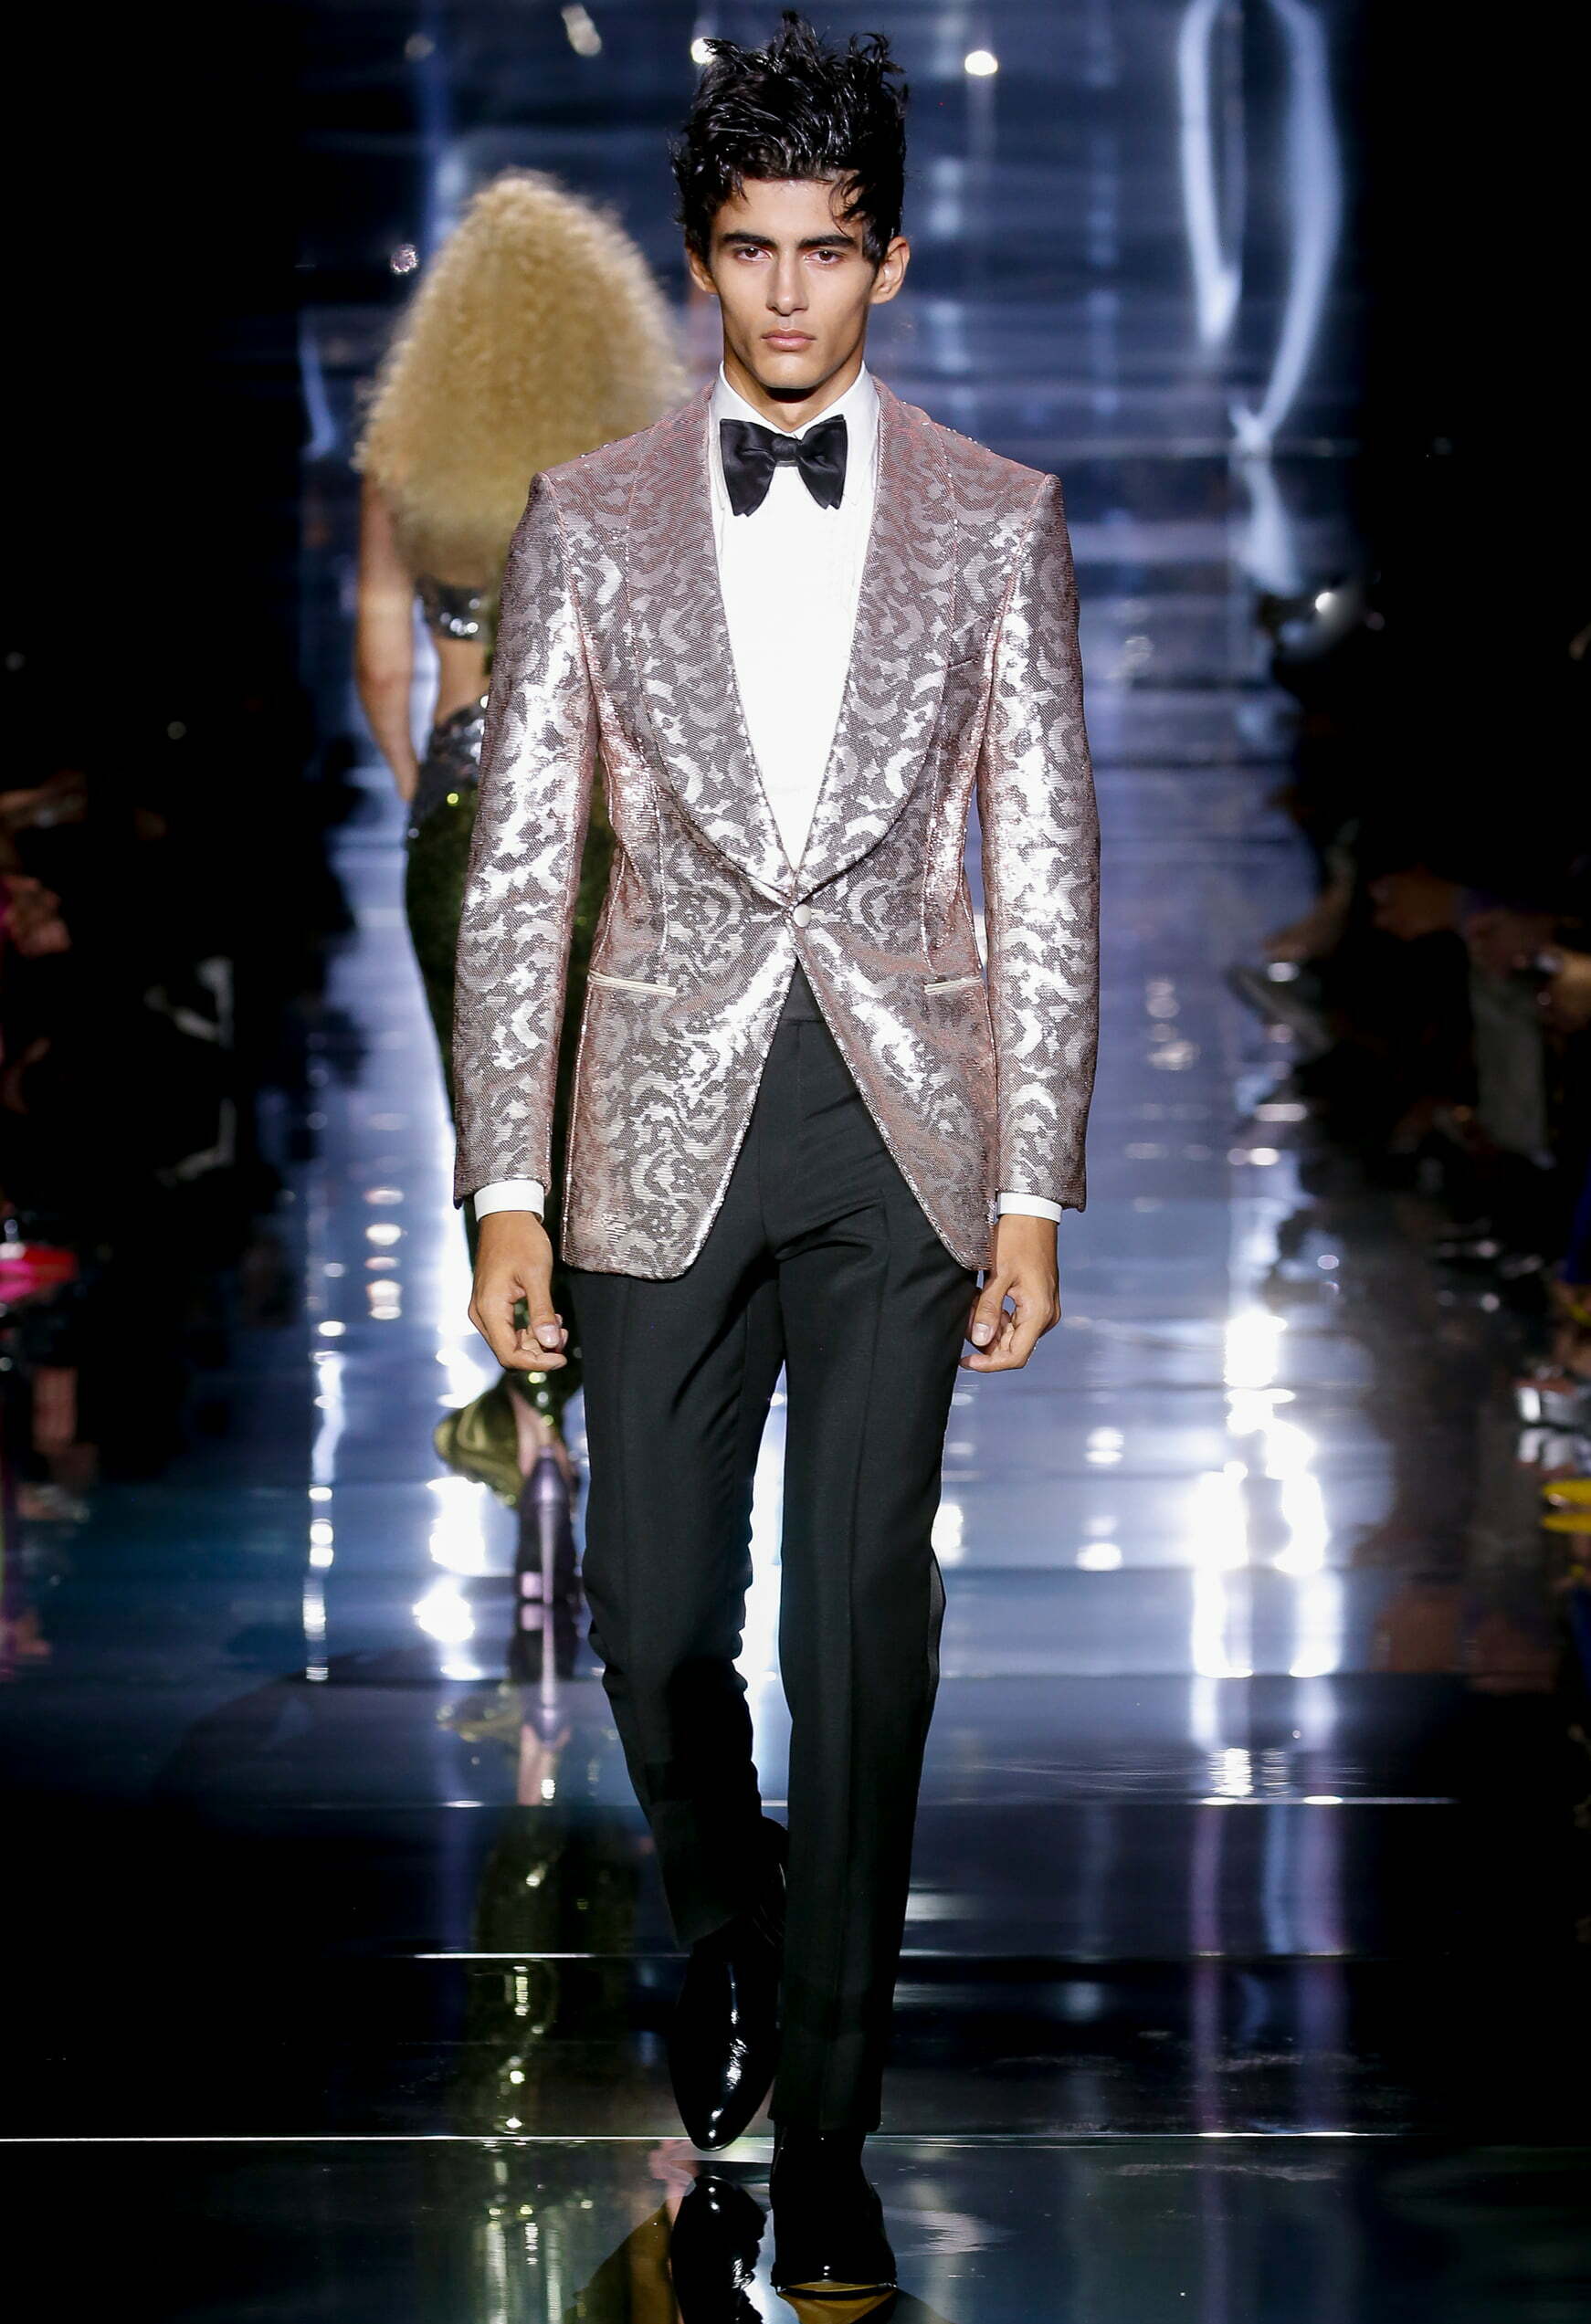 Tom Ford's Men's Runway Show Brings a Touch of '80s Hollywood to NYFW